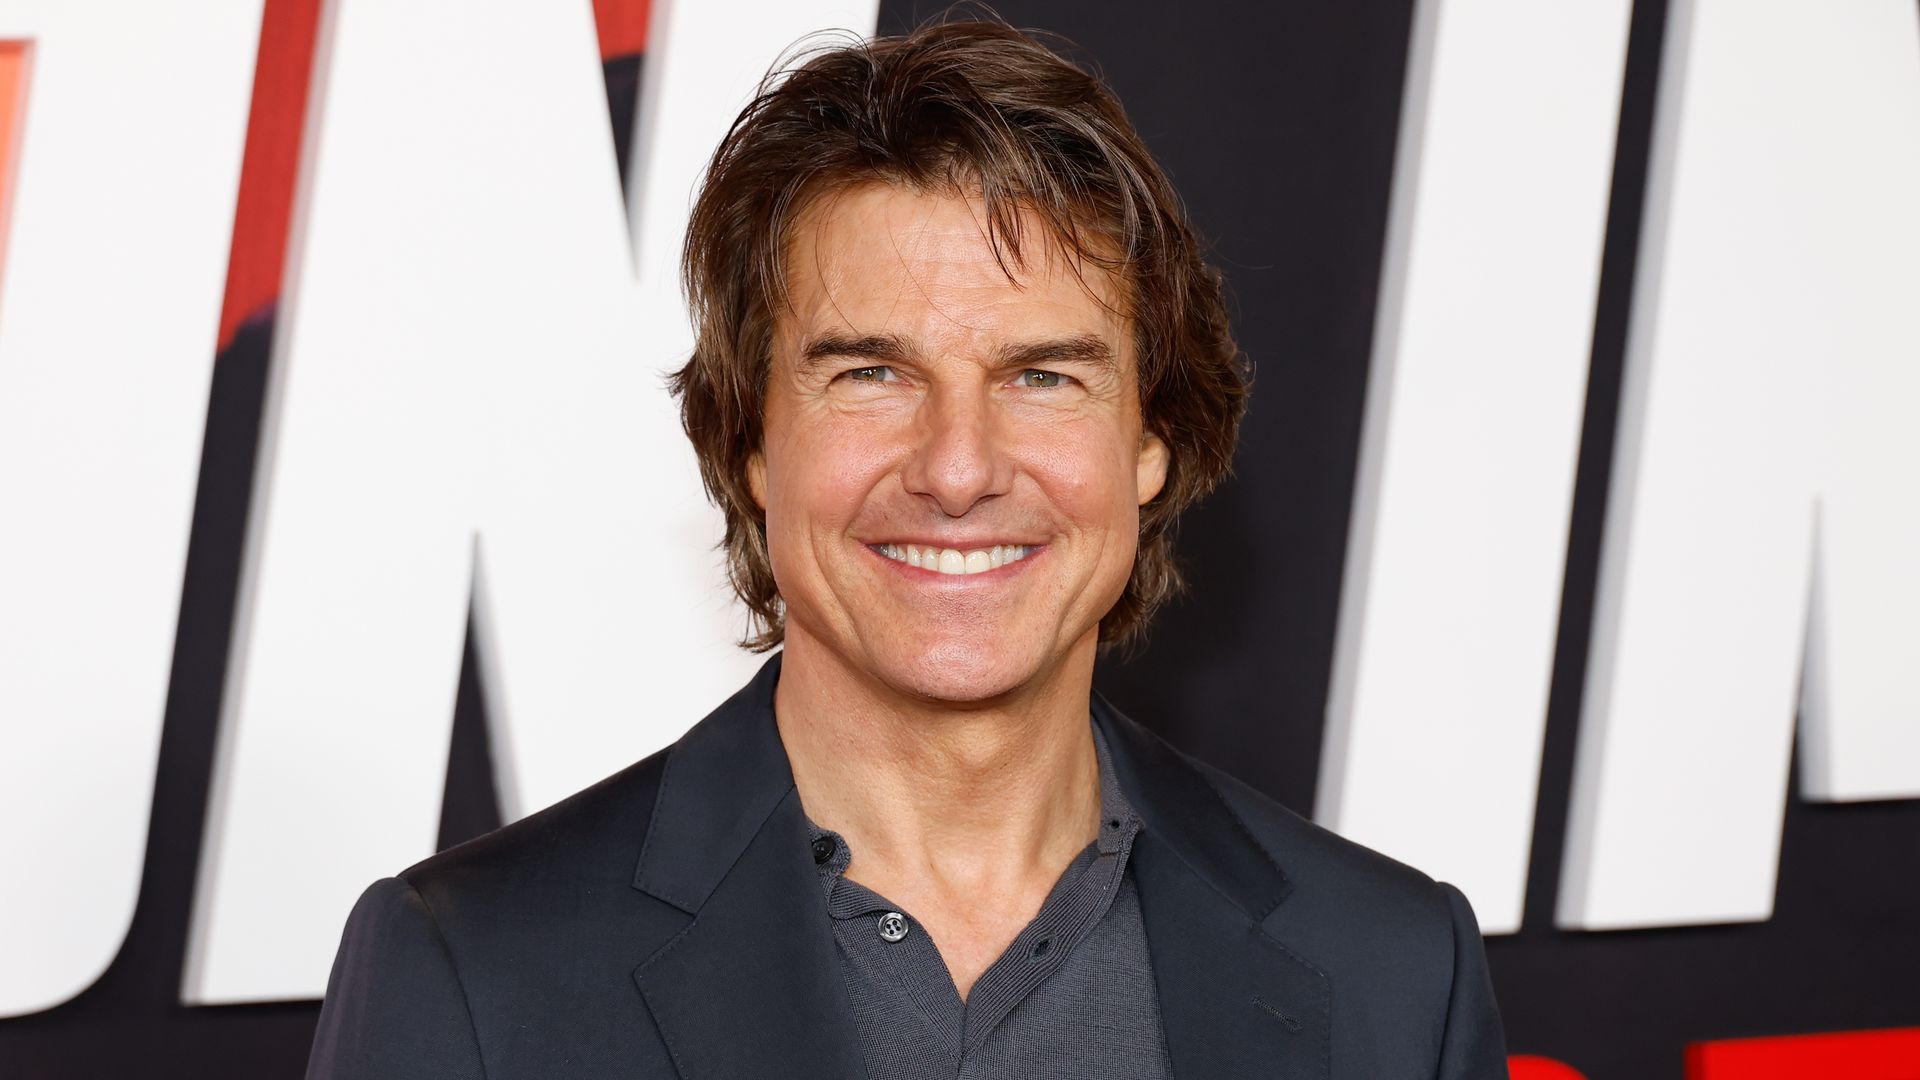 Confirmed Swiftie! Tom Cruise dances and laughs at Taylor Swift's Eras Tour